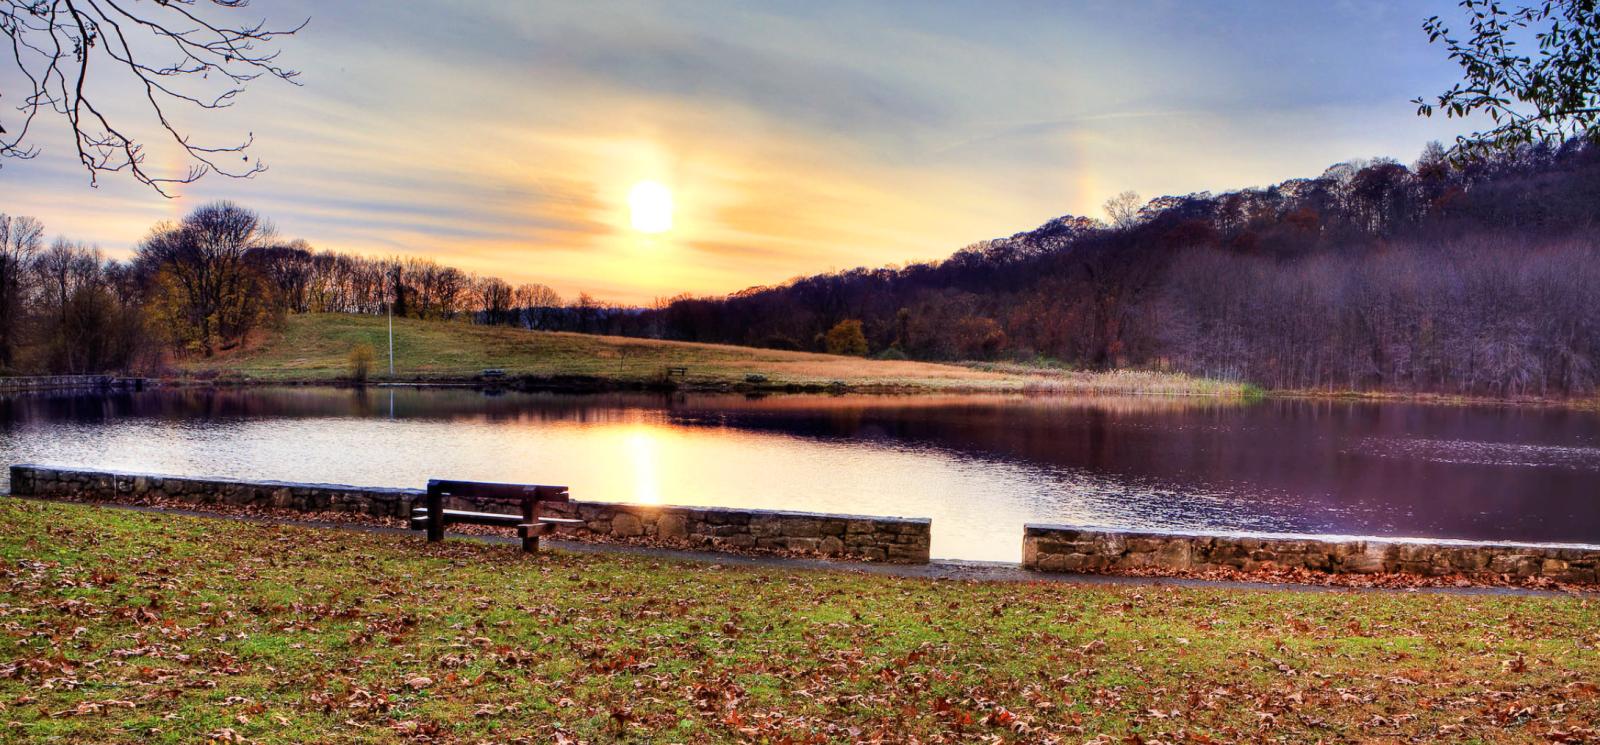 A sunset over the pond and fall leaves on the grass (Flickr@Sunday-Drive)